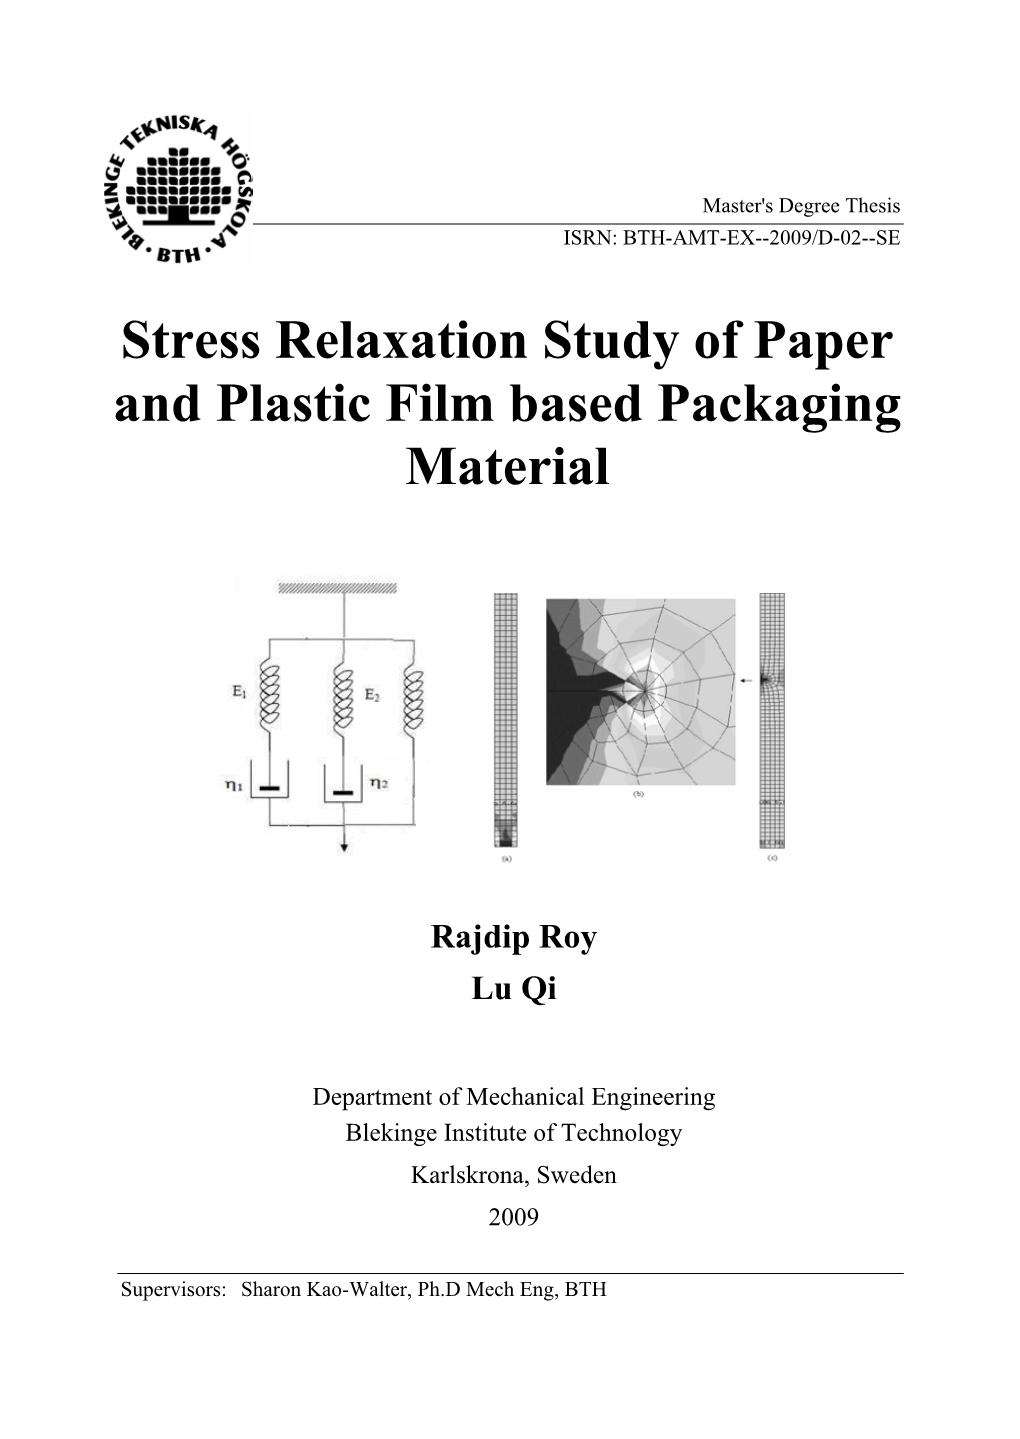 Stress Relaxation Study of Paper and Plastic Film Based Packaging Material